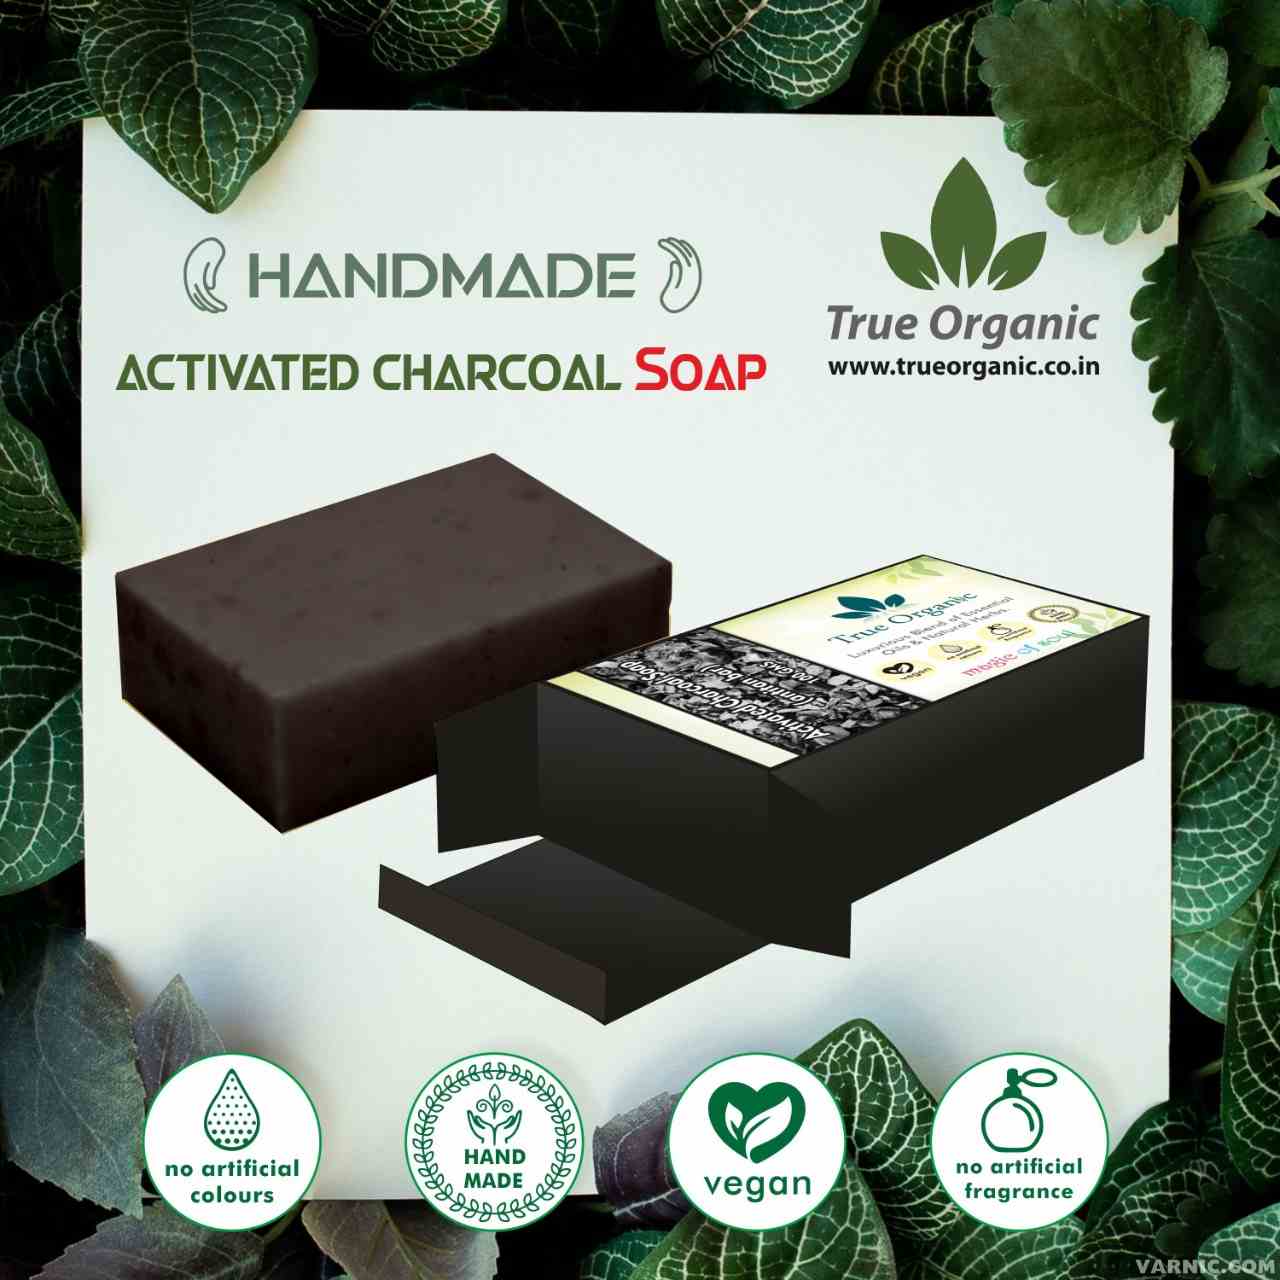 True Organic Activated Charcoal Soap